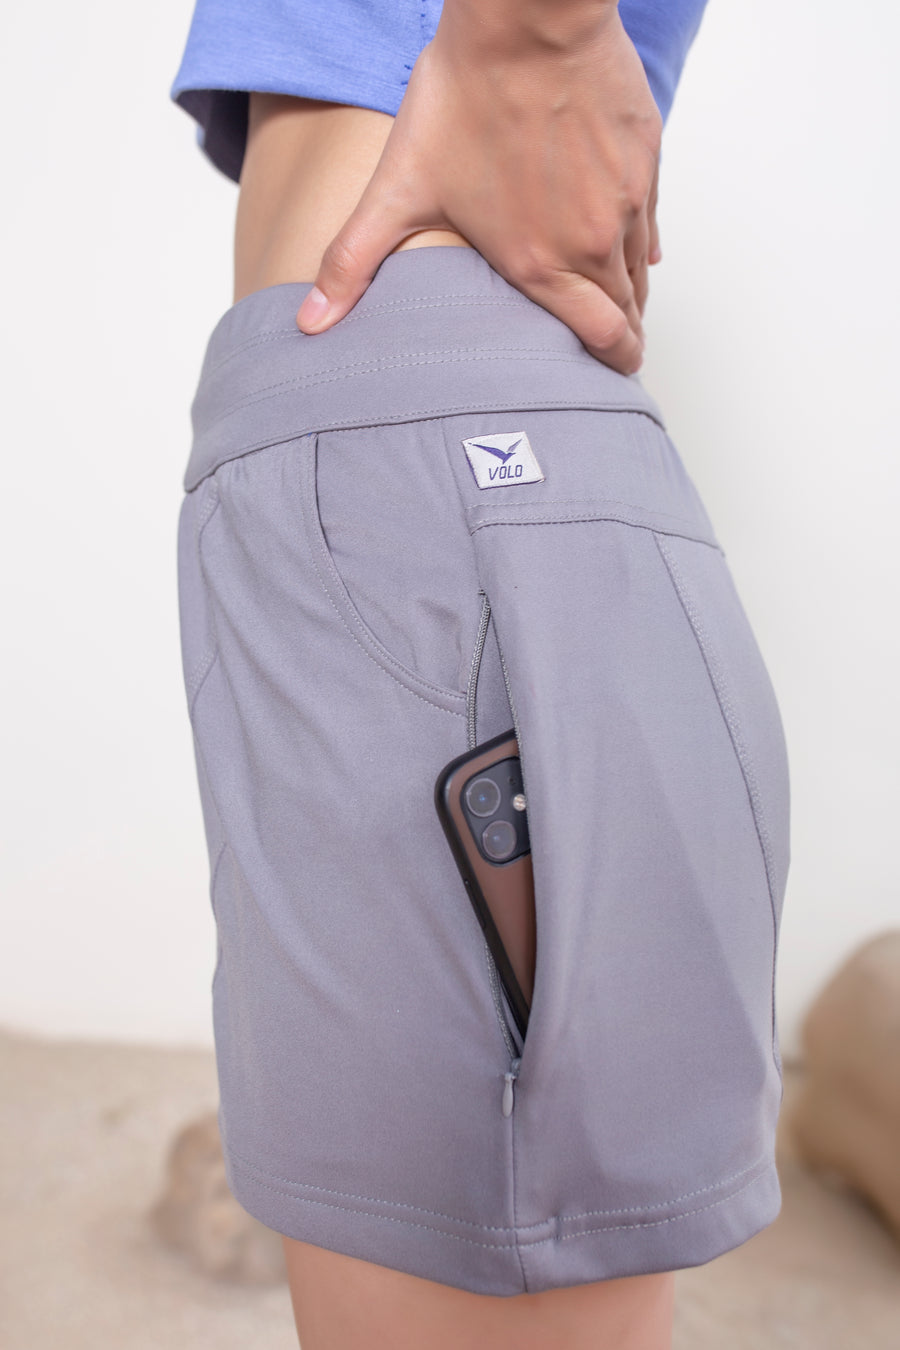 Women's Terra Shorts Silver Gray | VOLO Apparel | A blend of technology, function, and style. The Terra shorts are designed and ready for every active opportunity that comes your way. Your first women's shorts with deep pockets, a snap button smart phone pocket, a zippered key pocket, and a hidden zippered back pocket.  High waisted, great for climbing, yoga, training, running and chilling.